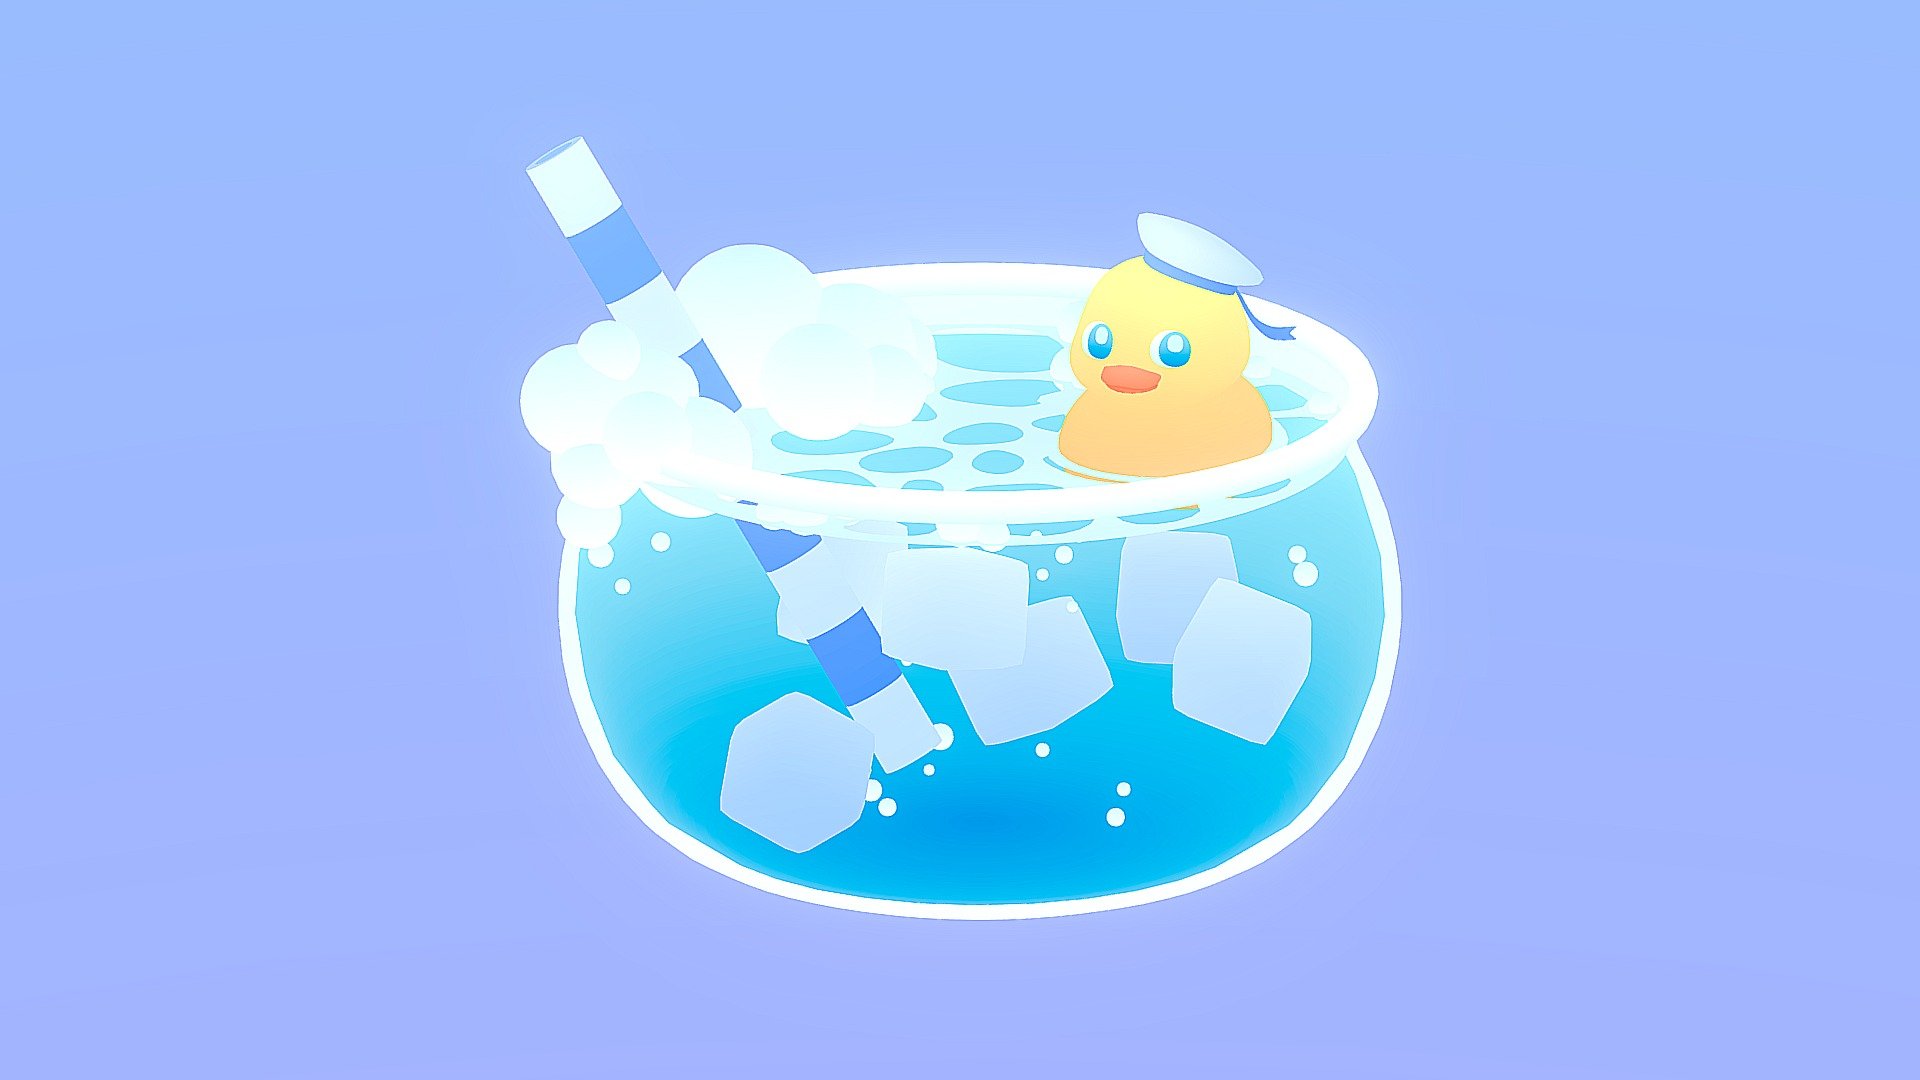 A cute little rubber duck in a drink for the first sketchfab weekly challenge of 2023! For this one I tried using a gradient texture atlas for the first time, it was a lot of fun! - Rubber Duck in a Drink - 3D model by icebell (@icedbell) 3d model